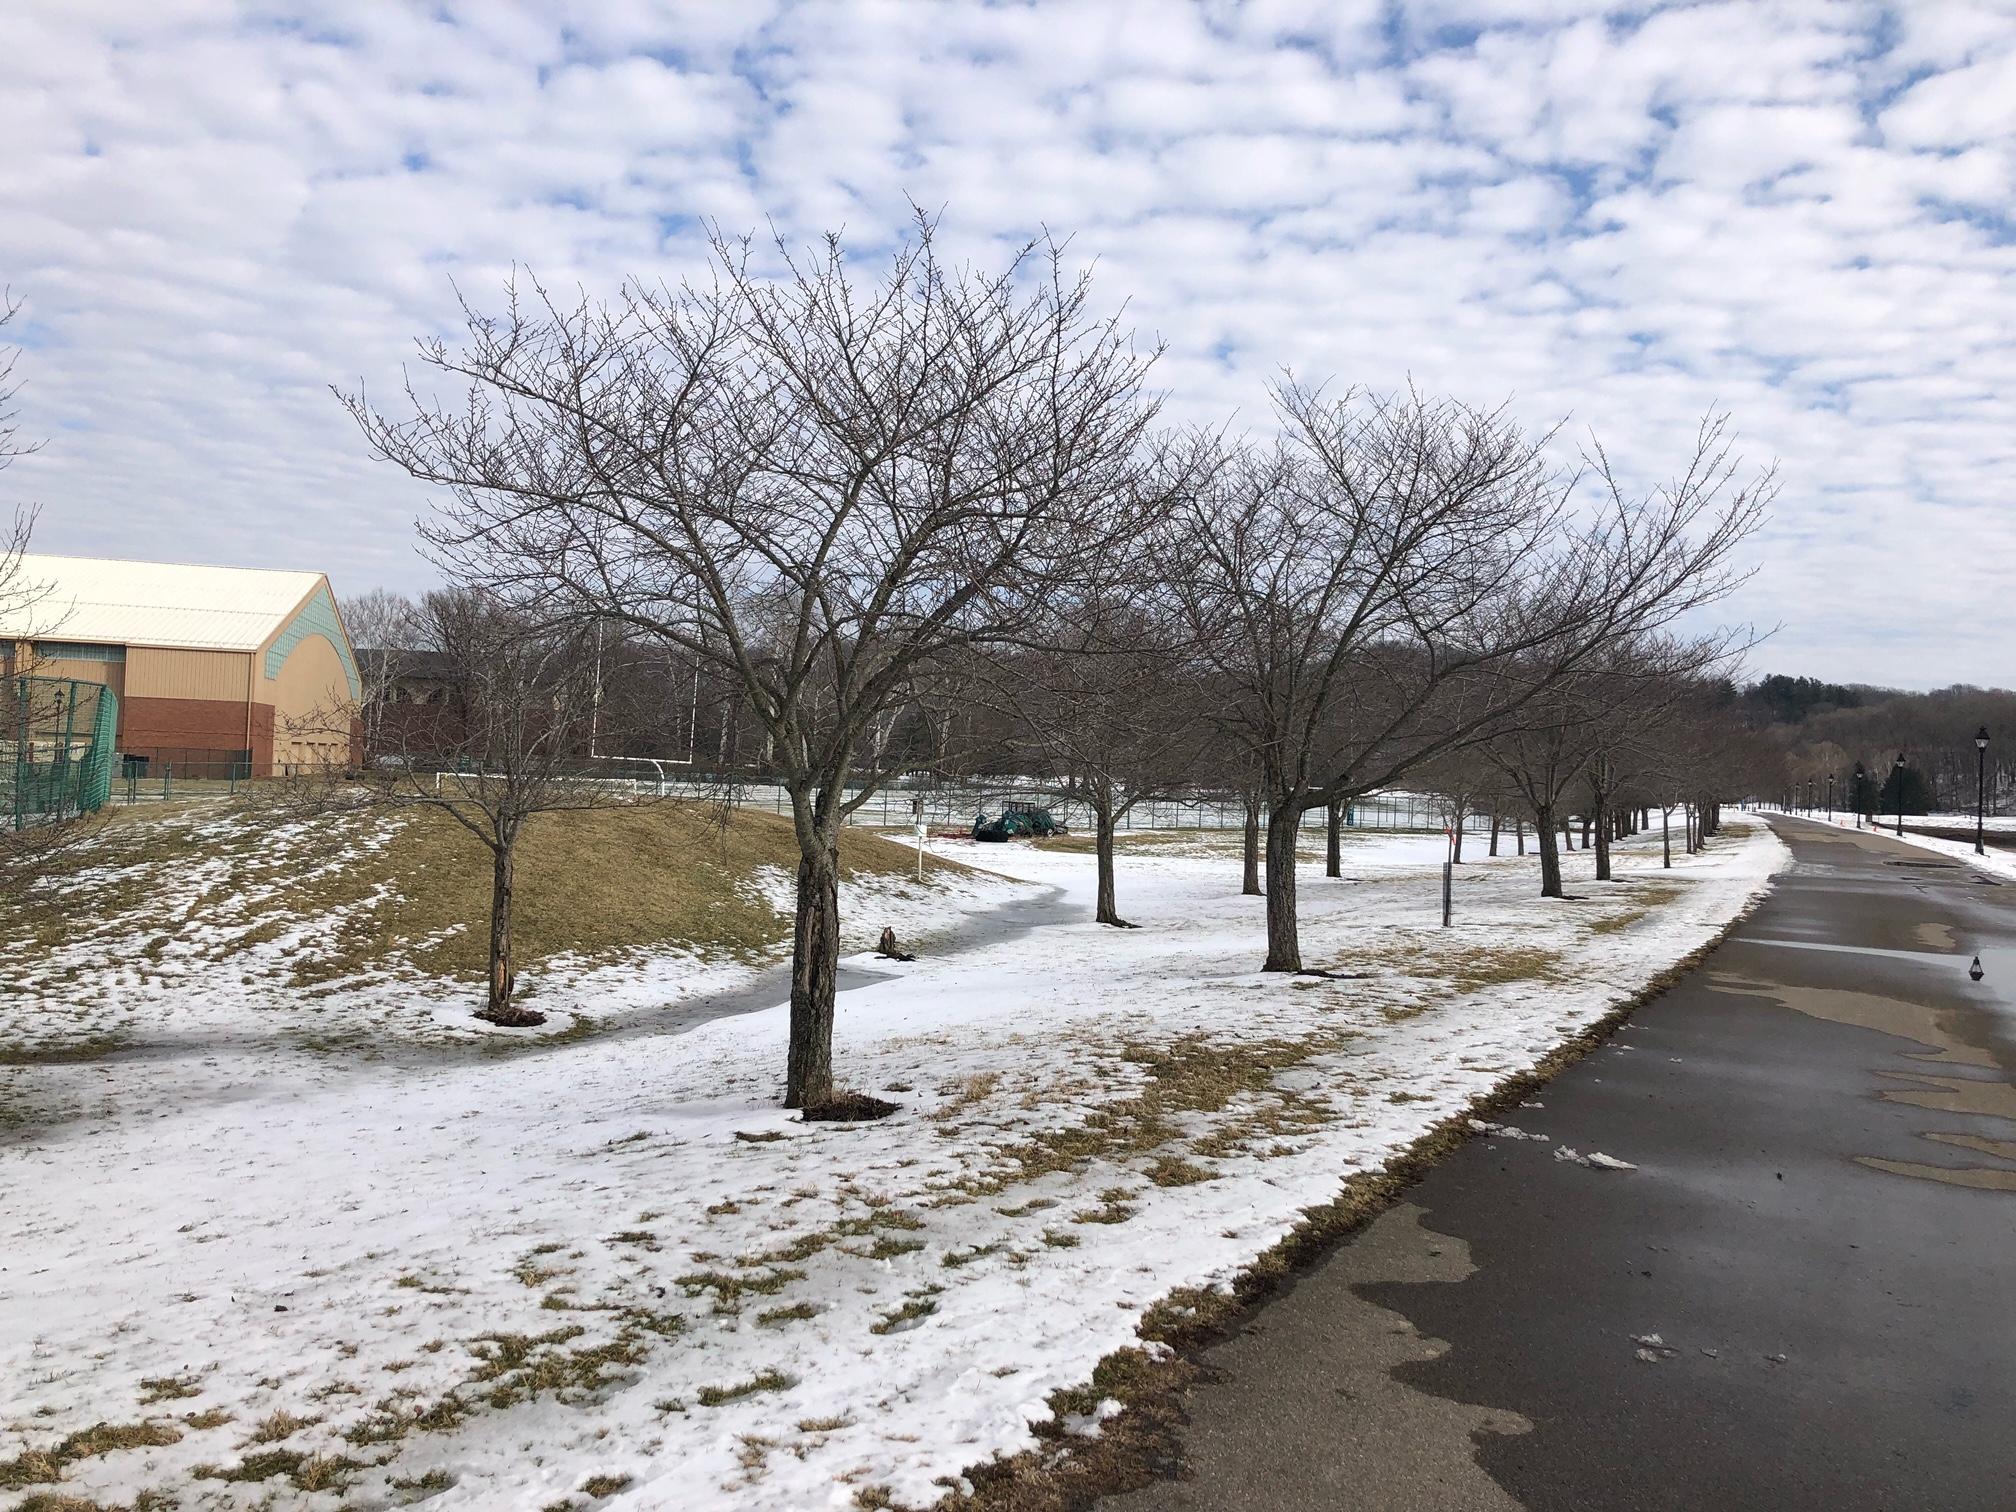 Bare cherry trees along the bike path with light snow on the ground